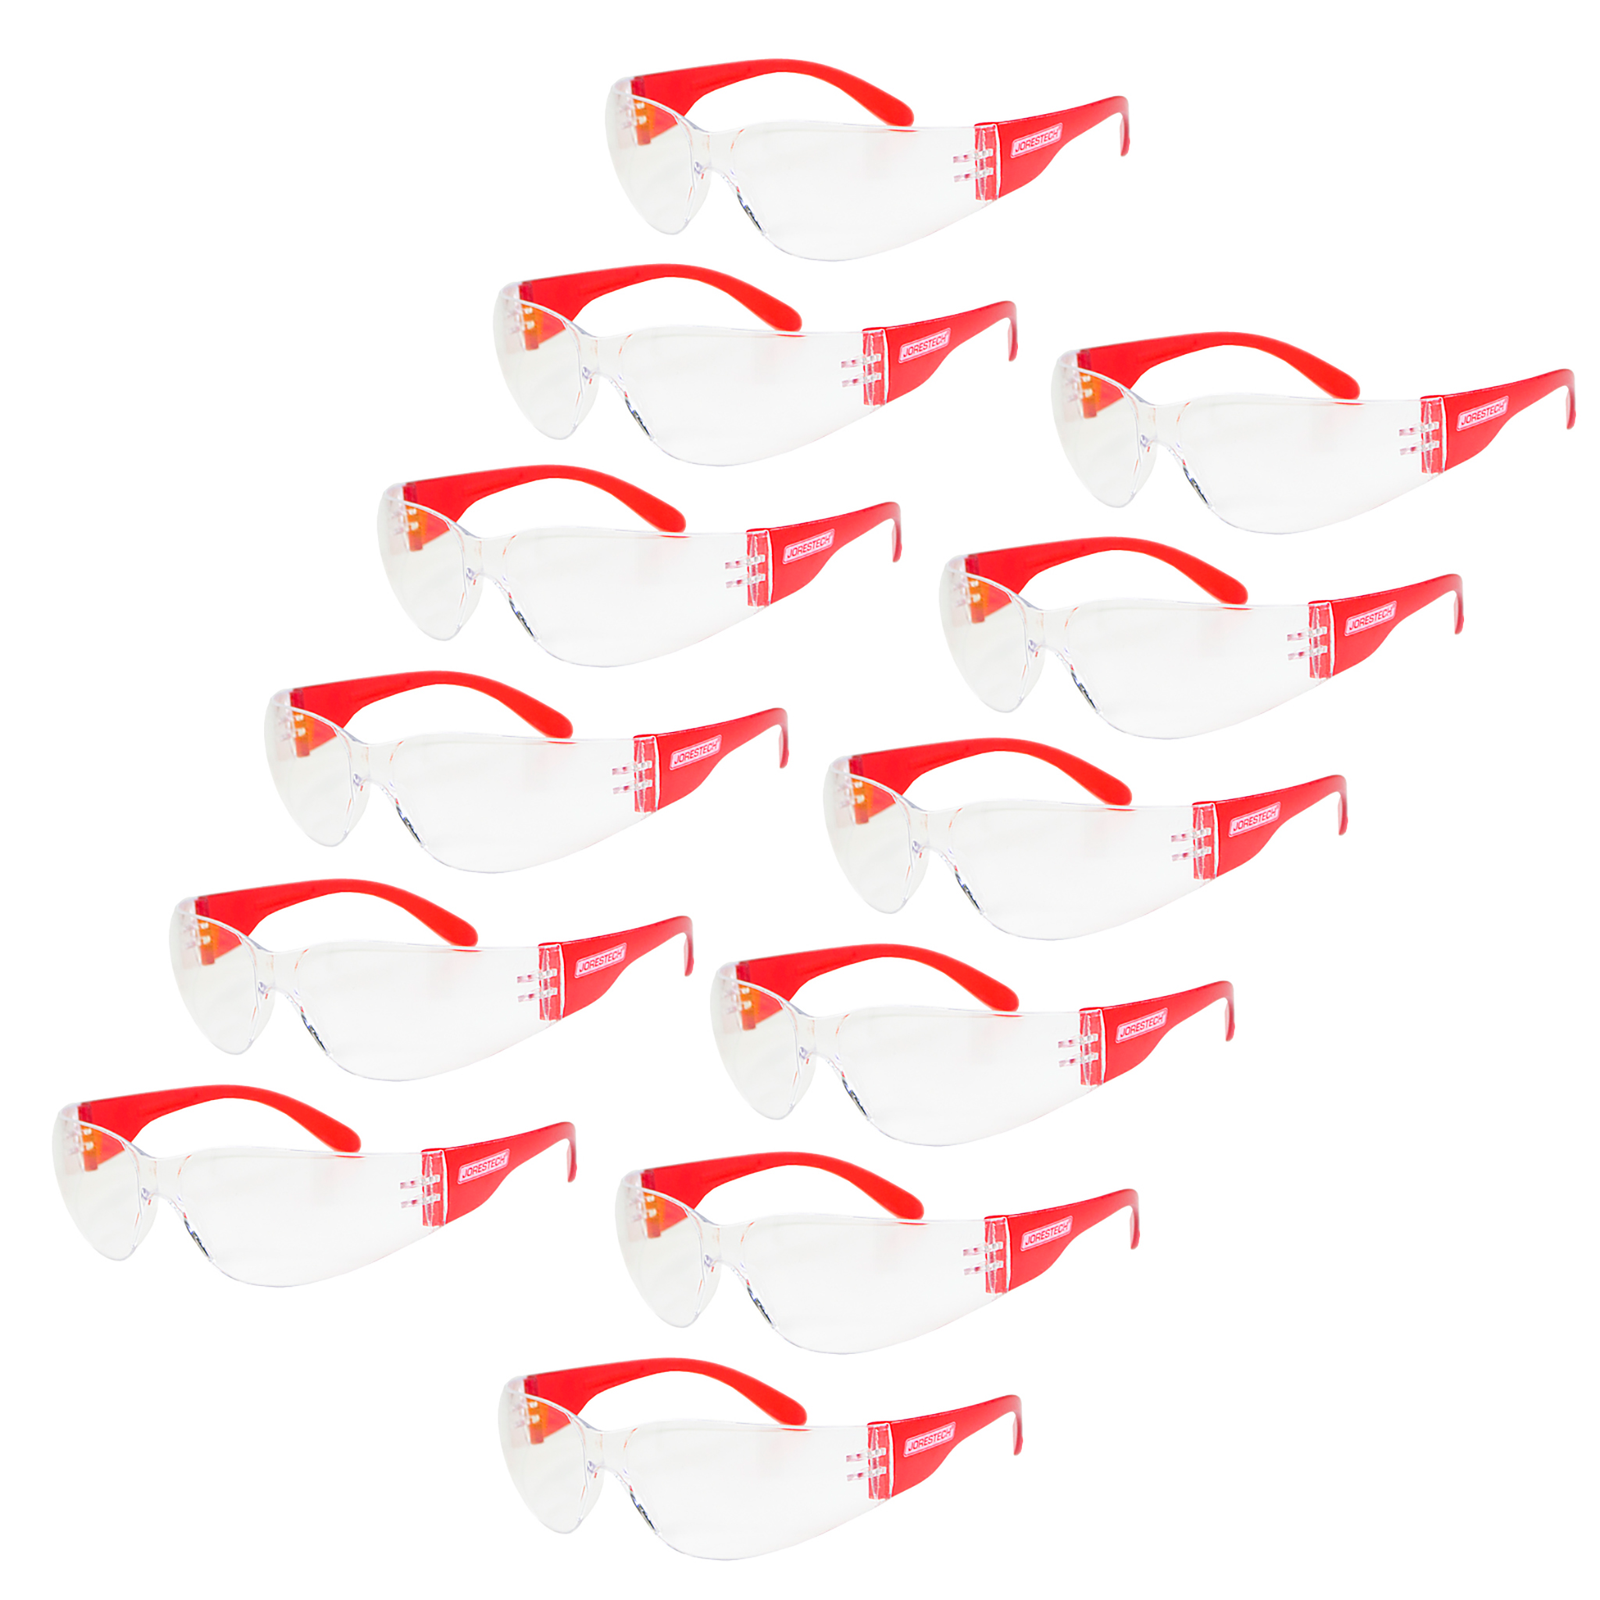 12 pairs of JORESTECH clear safety glasses with clear side shield for high impact protection. These ANSI compliant safety glasses have clear polycarbonate lenses.